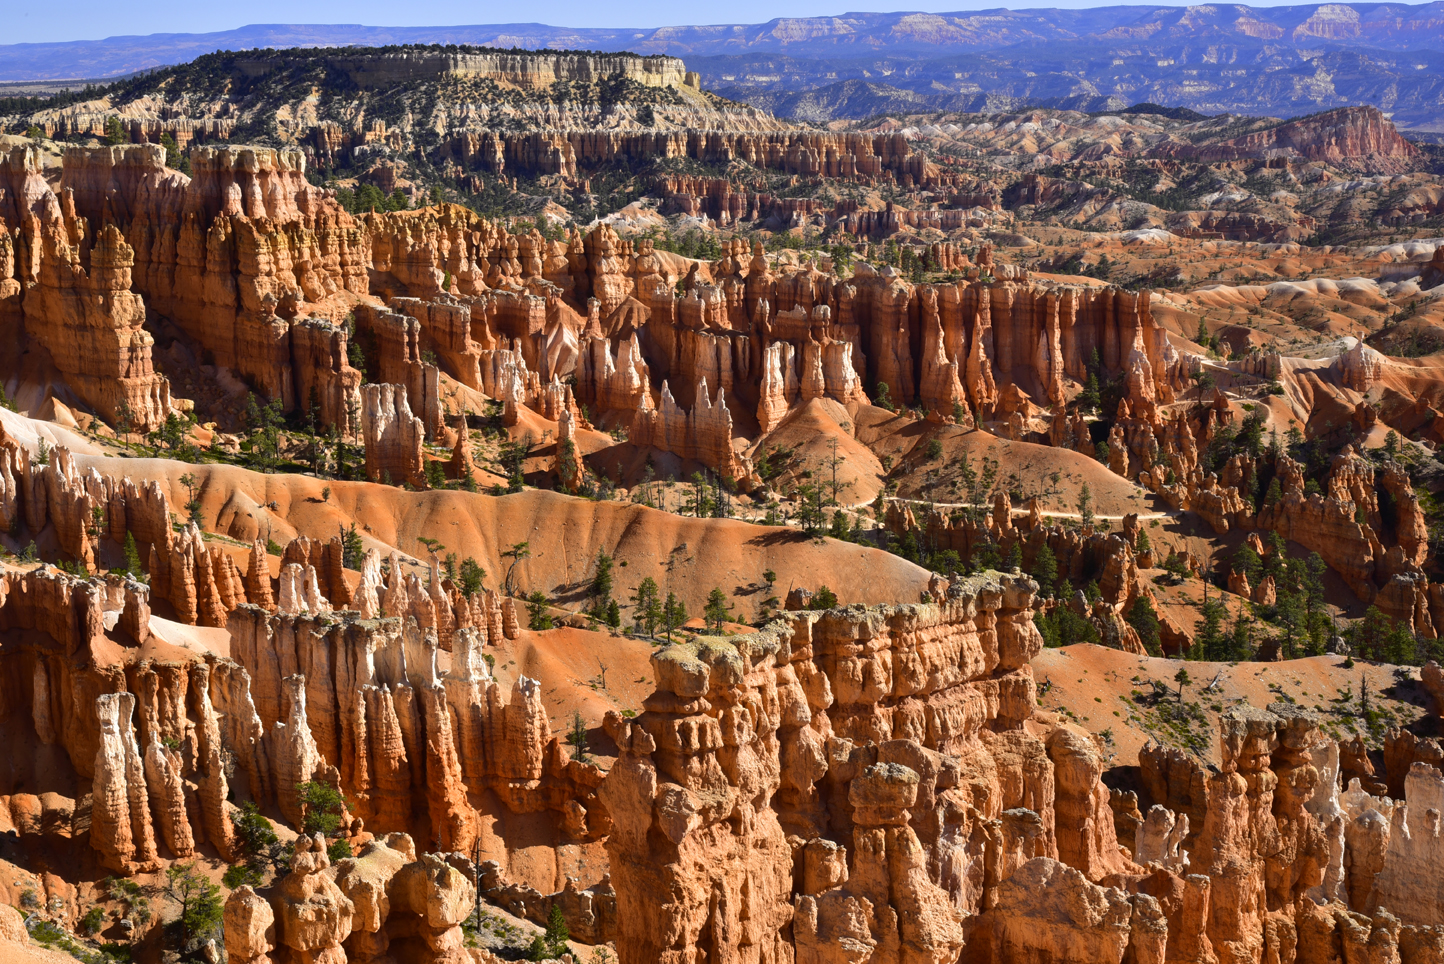 View from Sunset Point  -  Bryce Canyon National Park, Utah